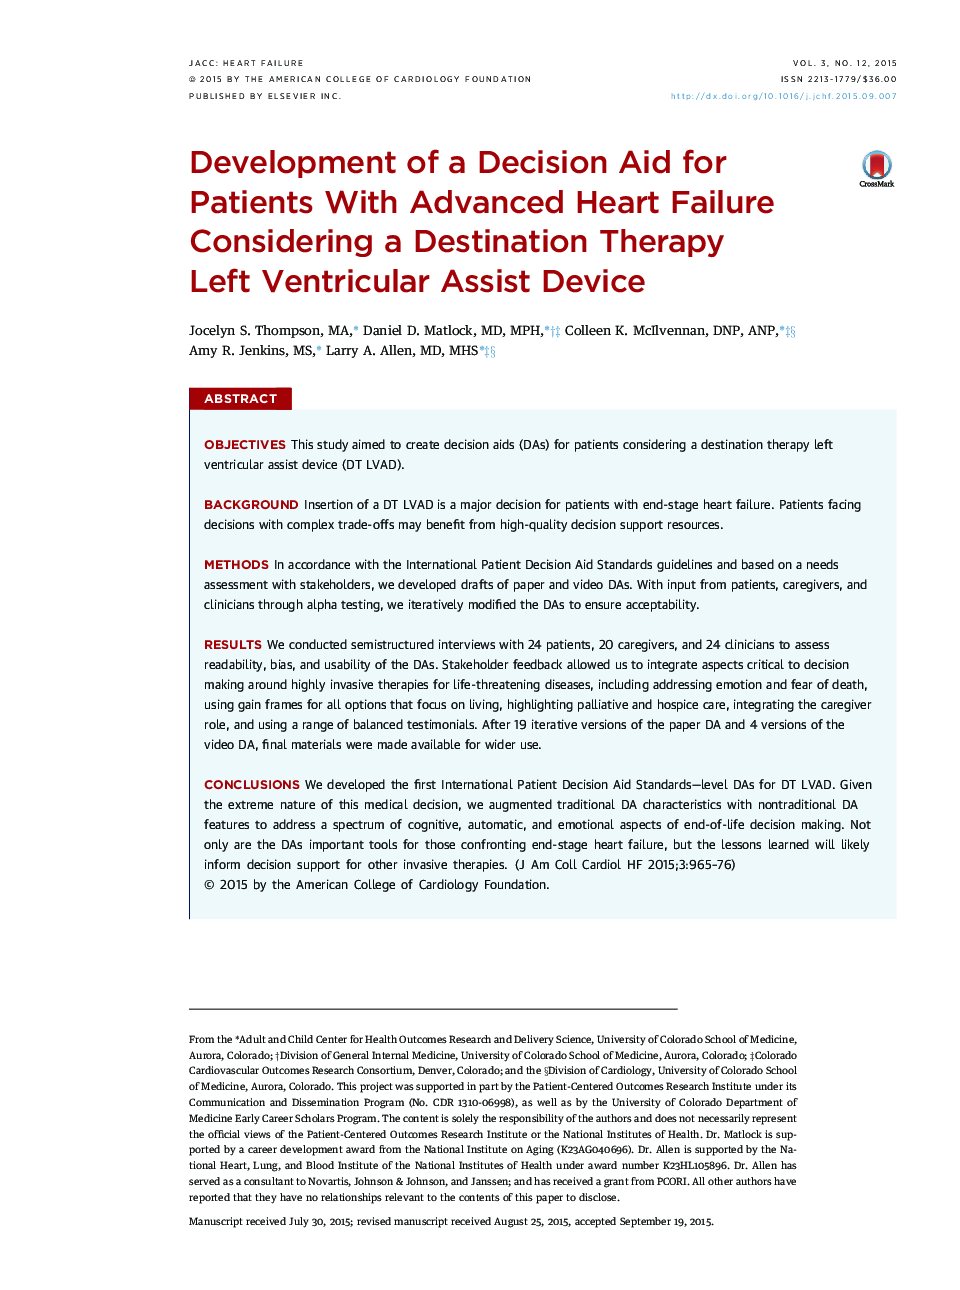 Development of a Decision Aid for Patients With Advanced Heart Failure Considering a Destination Therapy Left Ventricular Assist Device 